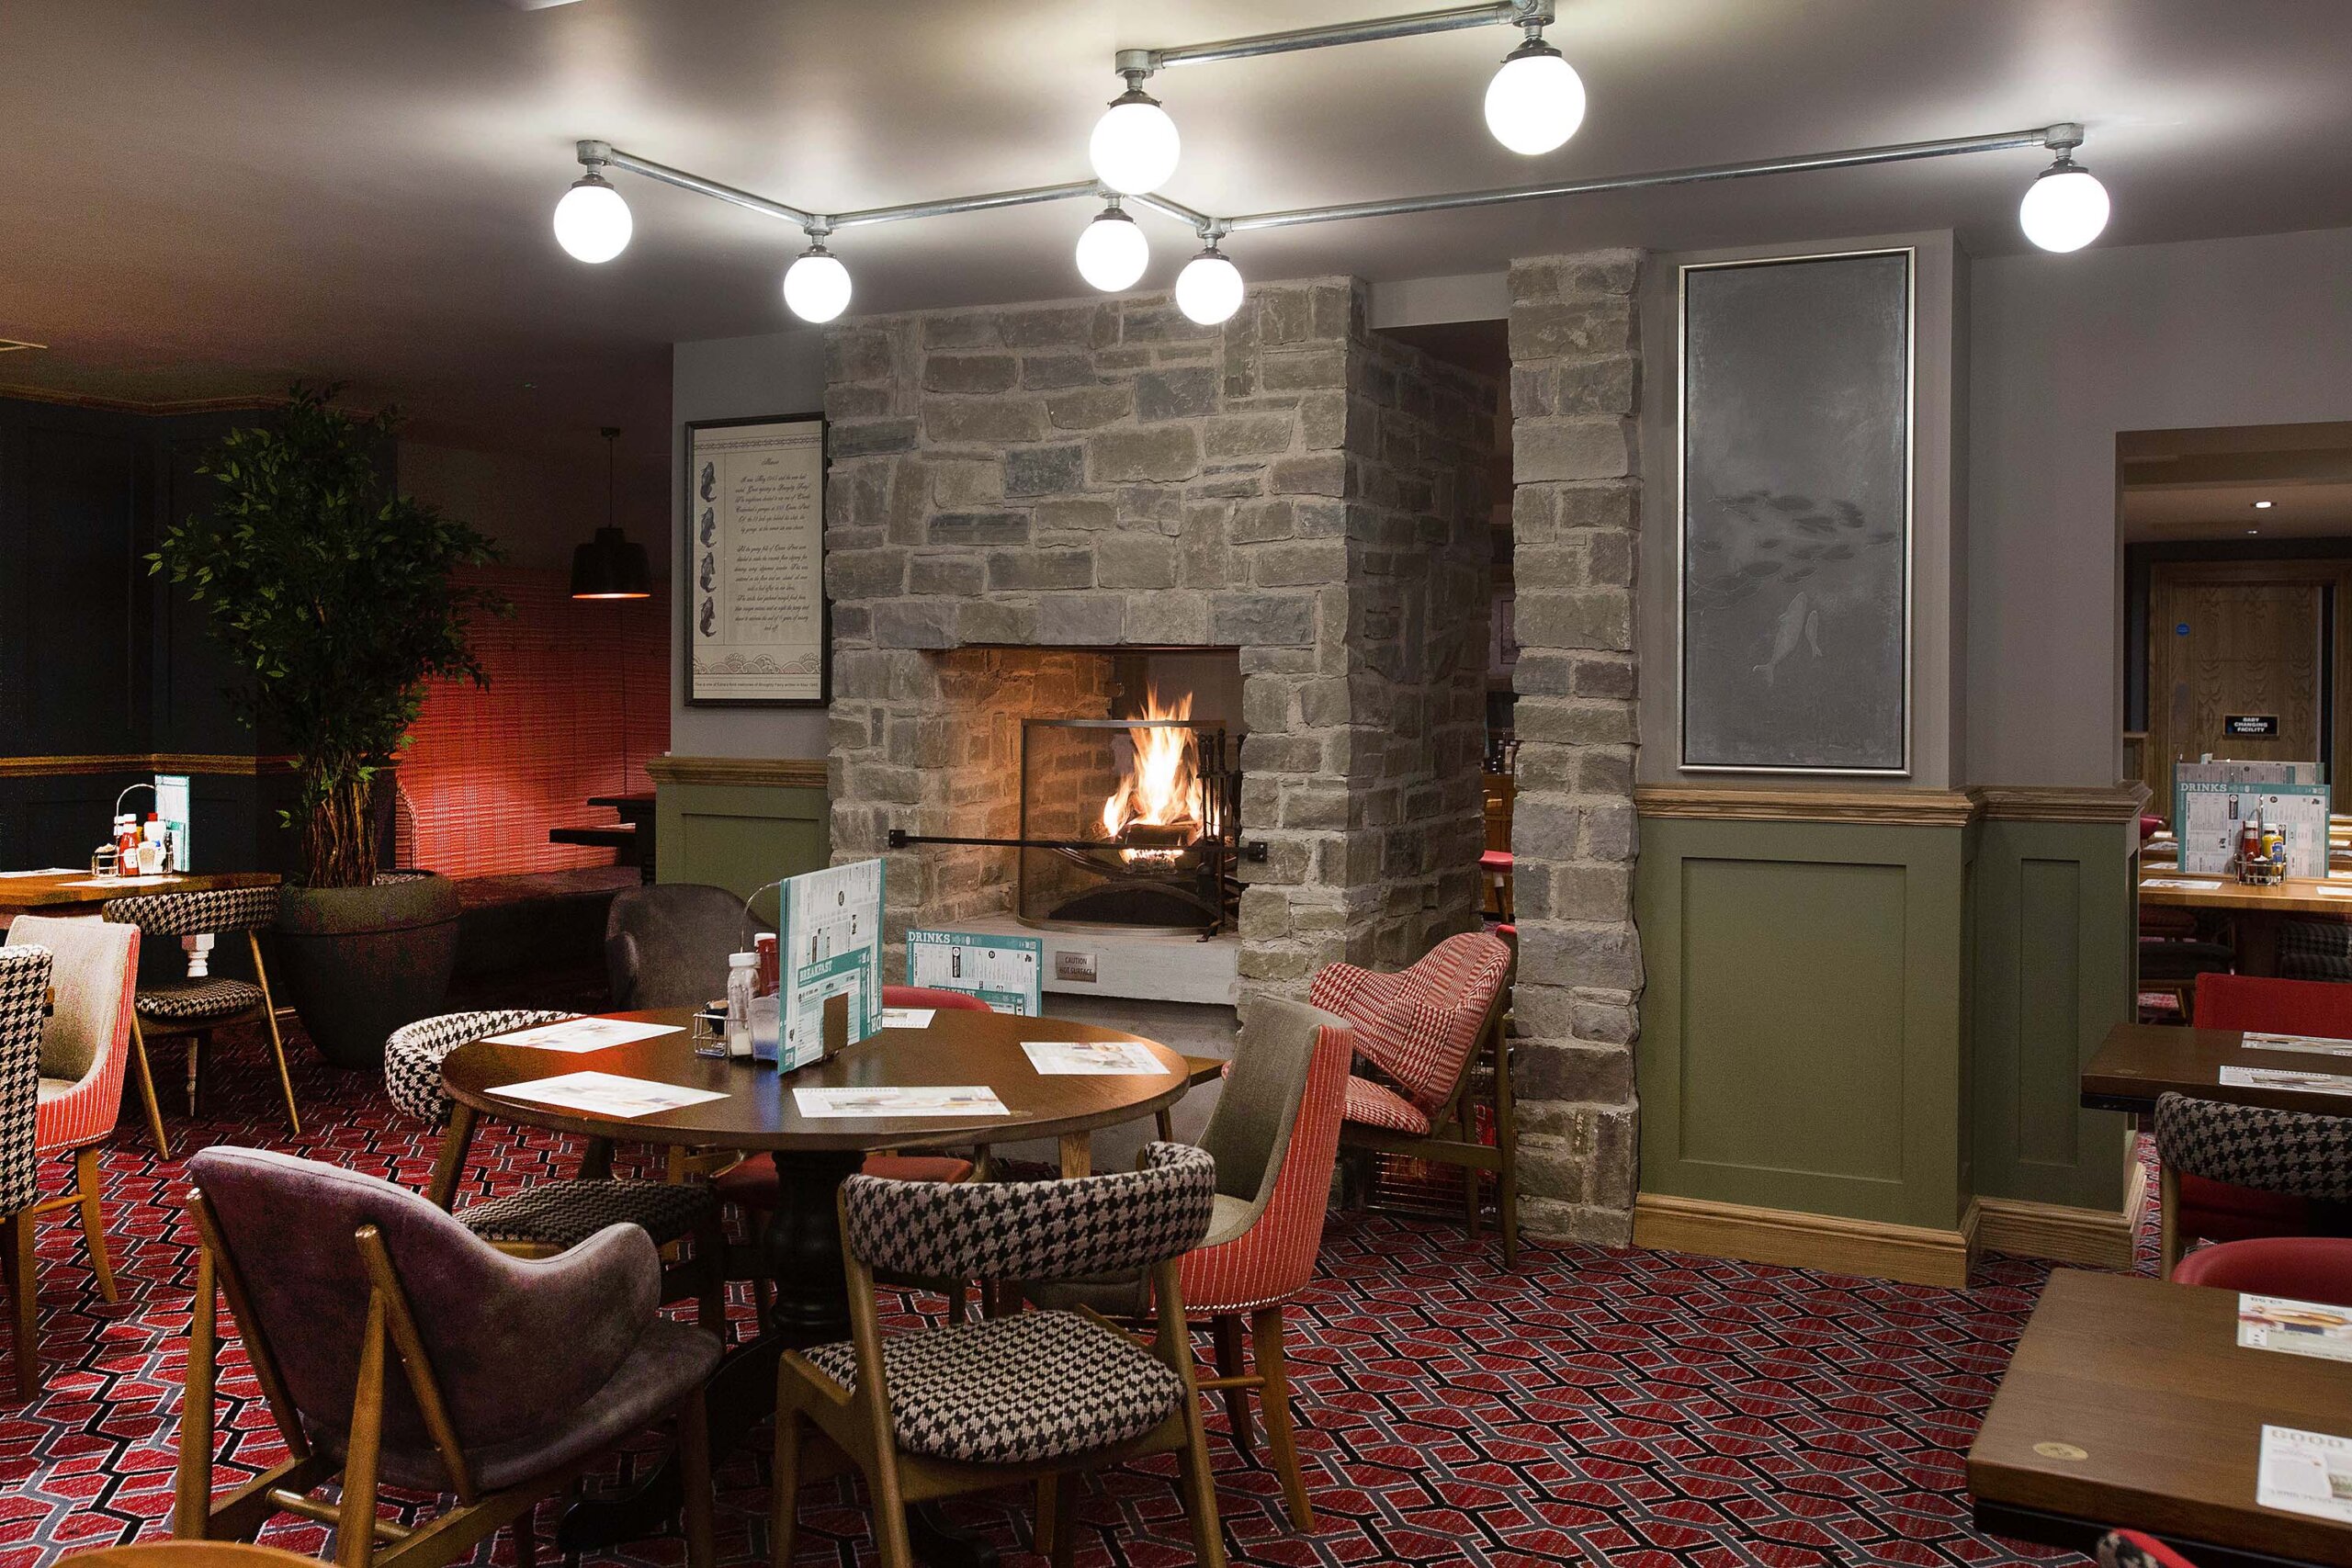 Jolly's Hotel, Broughty Ferry, pub seating area